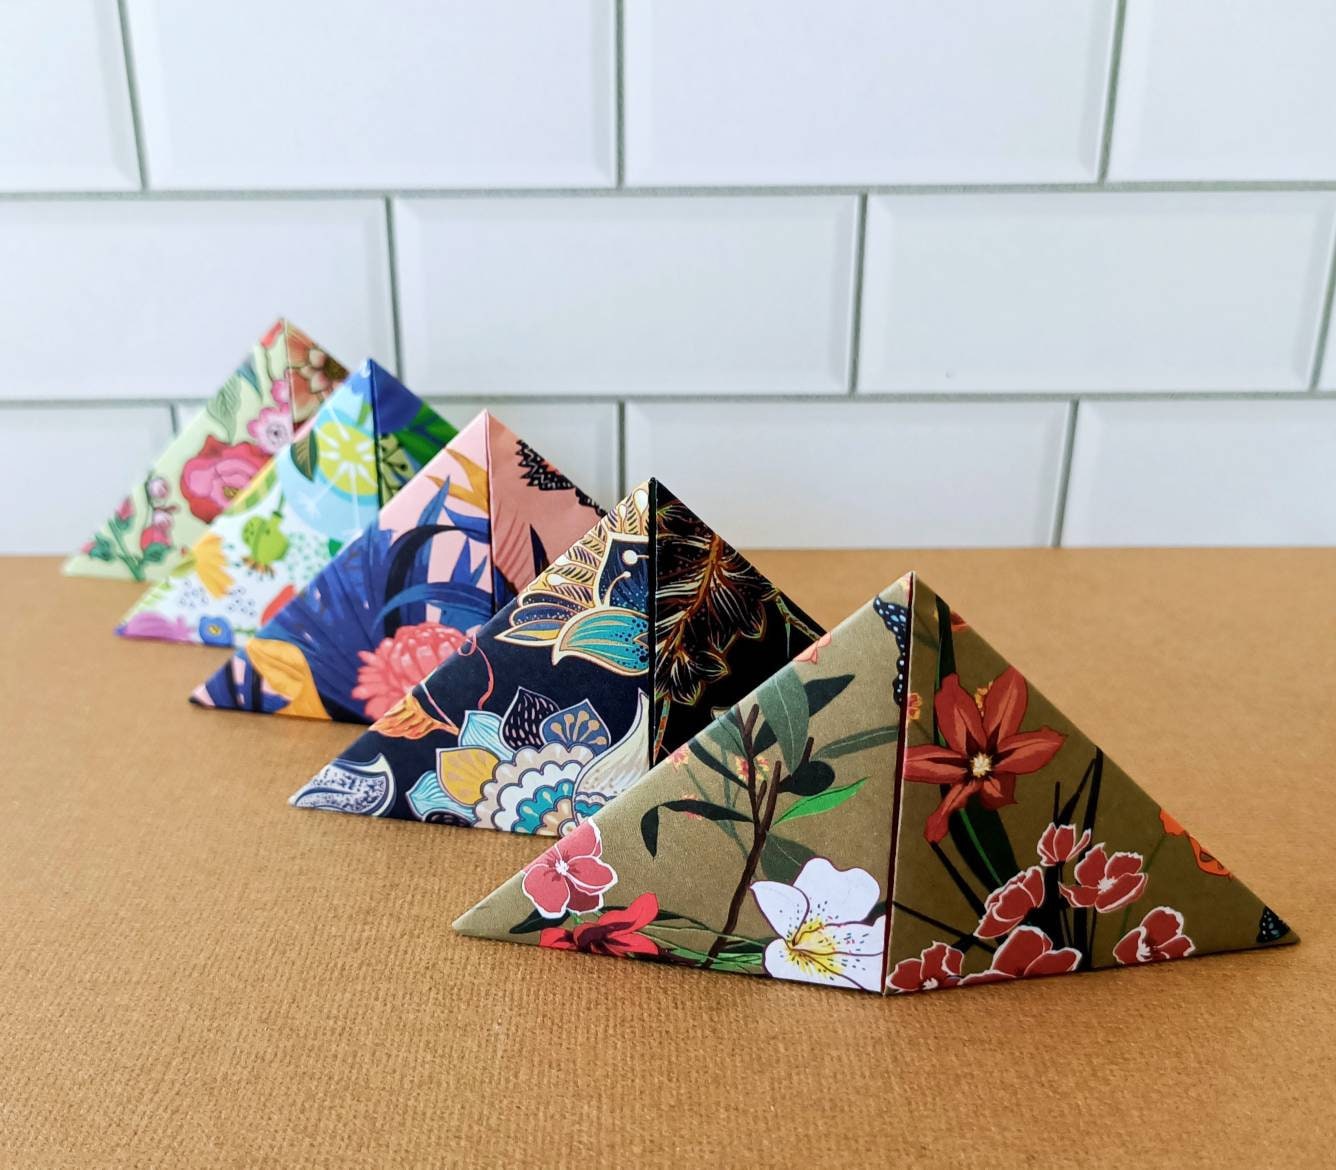 Origami DIY Kit, Learn How to Make Paper Flowers, With This Craft Kit for  Teens Kids and Adults, Do It Yourself or Do It Together Activity 